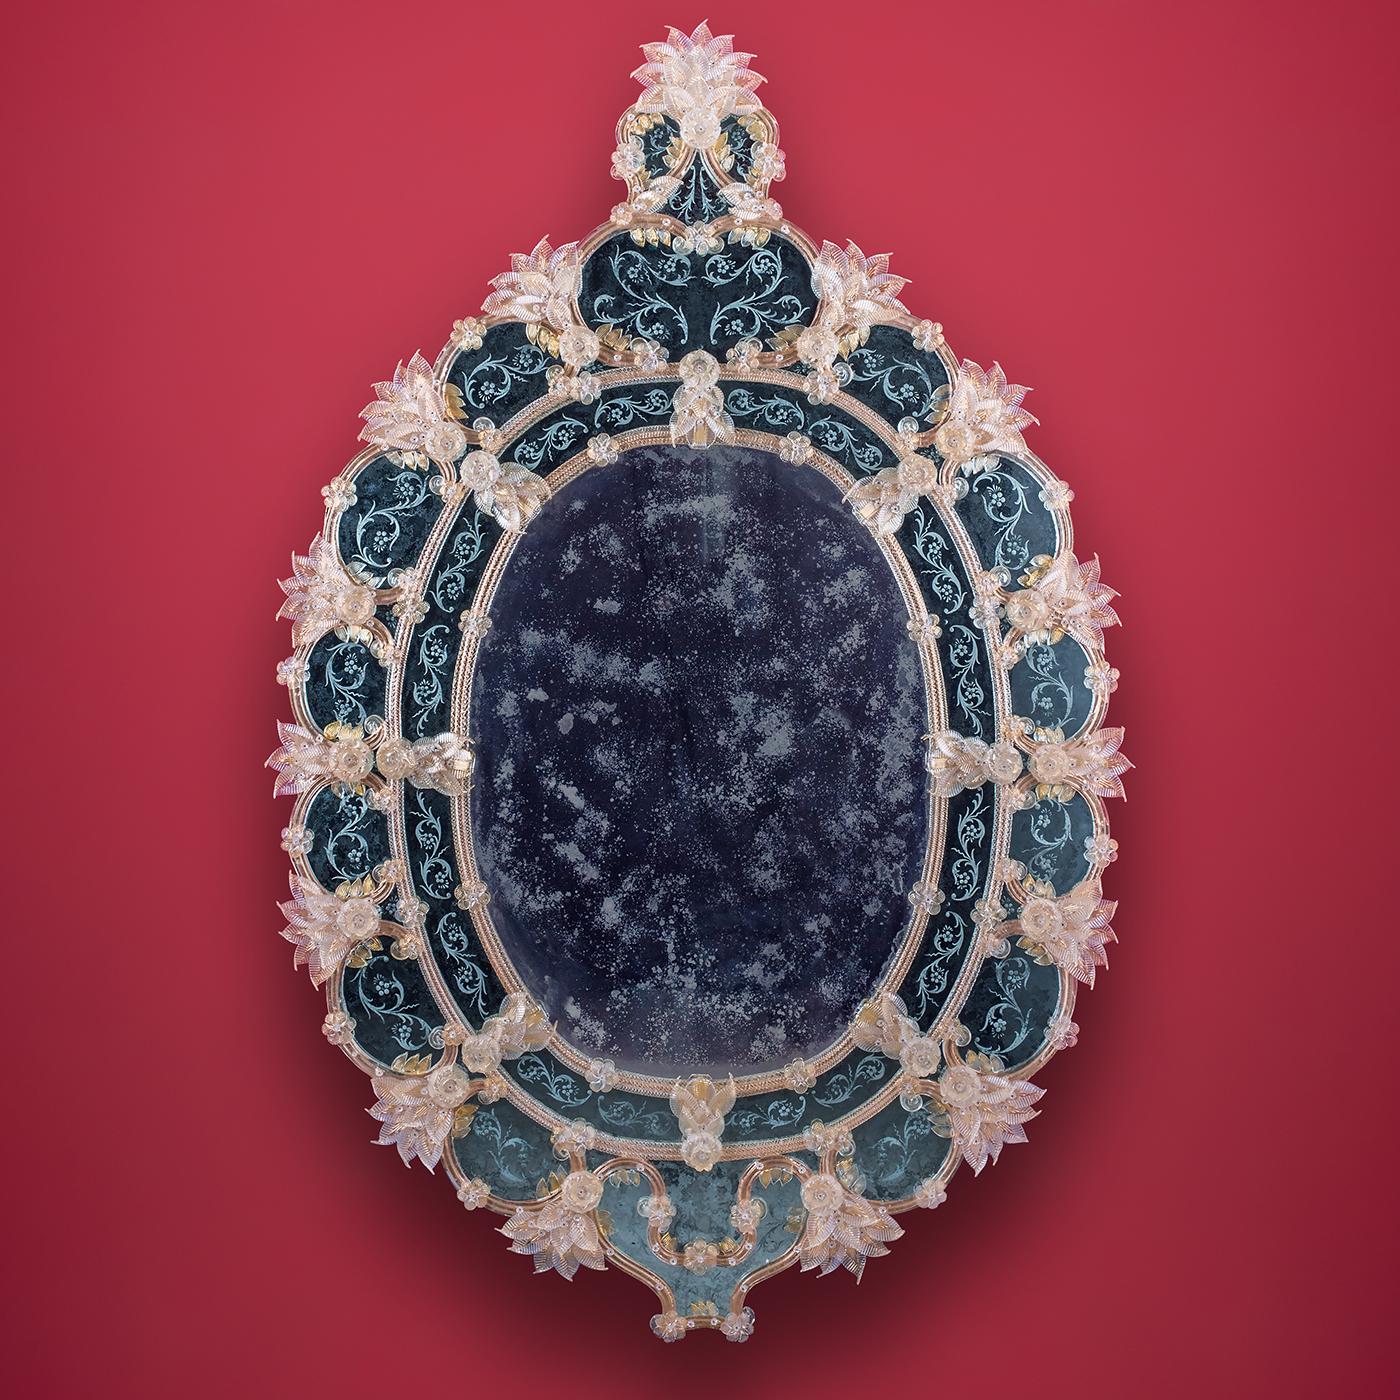 This piece of furniture is a reproduction of the typical Antique Venetian Mirror made in Murano glass, silvered with antique silvering entirely produced in mercury. This technique is typical of the 18th-century Venetian area. The entirely hand-made